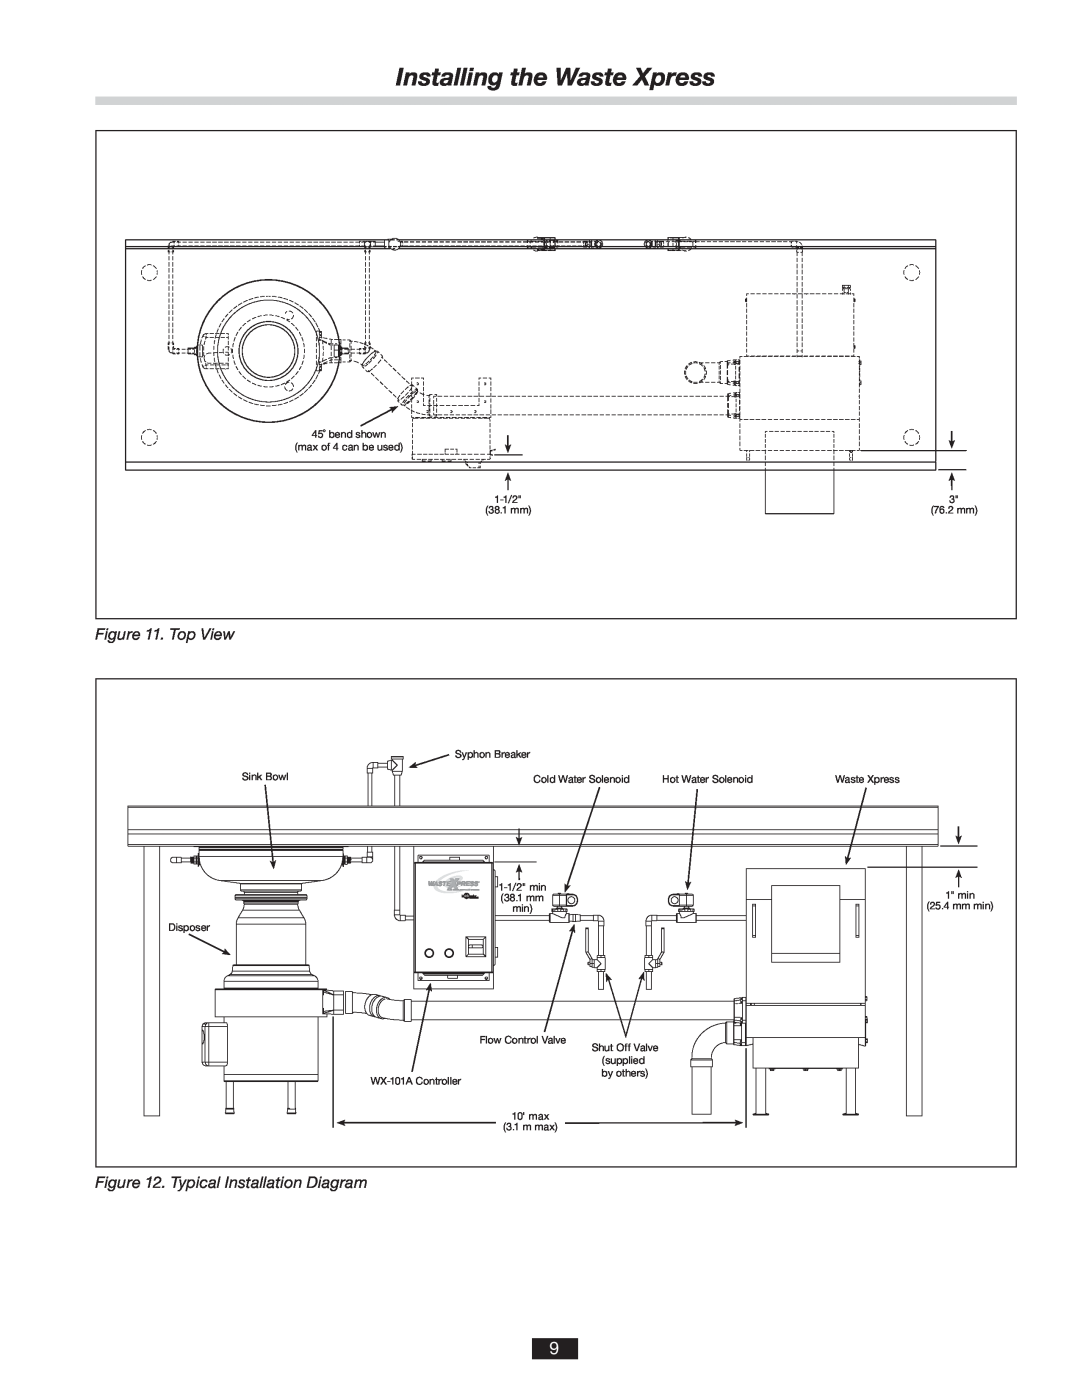 InSinkErator 14481 manual Installing the Waste Xpress, Top View, Typical Installation Diagram 